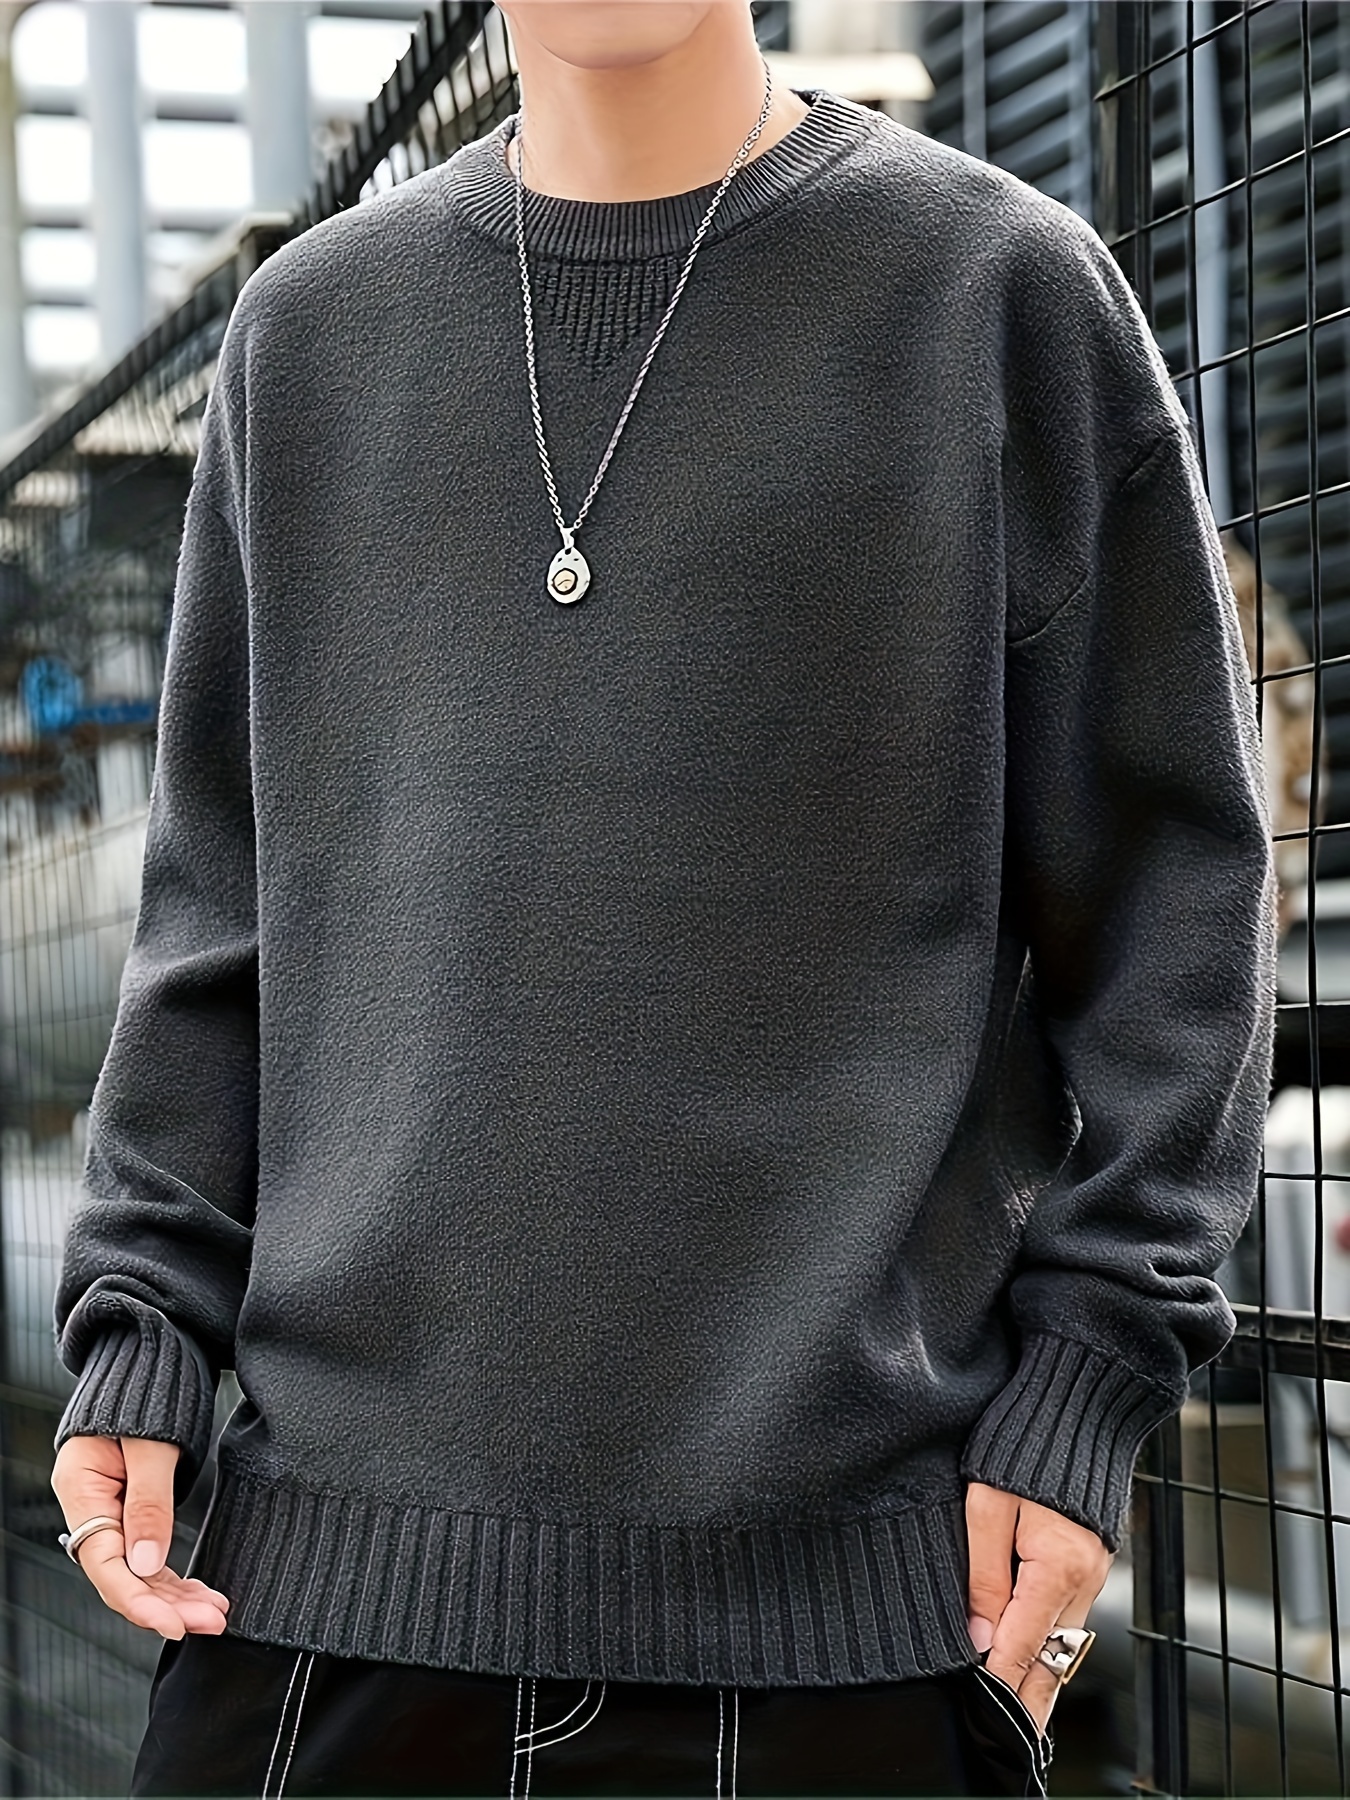 Men Oversized Sweaters Winter Knitted Sweater Solid Casual Long Sleeve  Pullovers